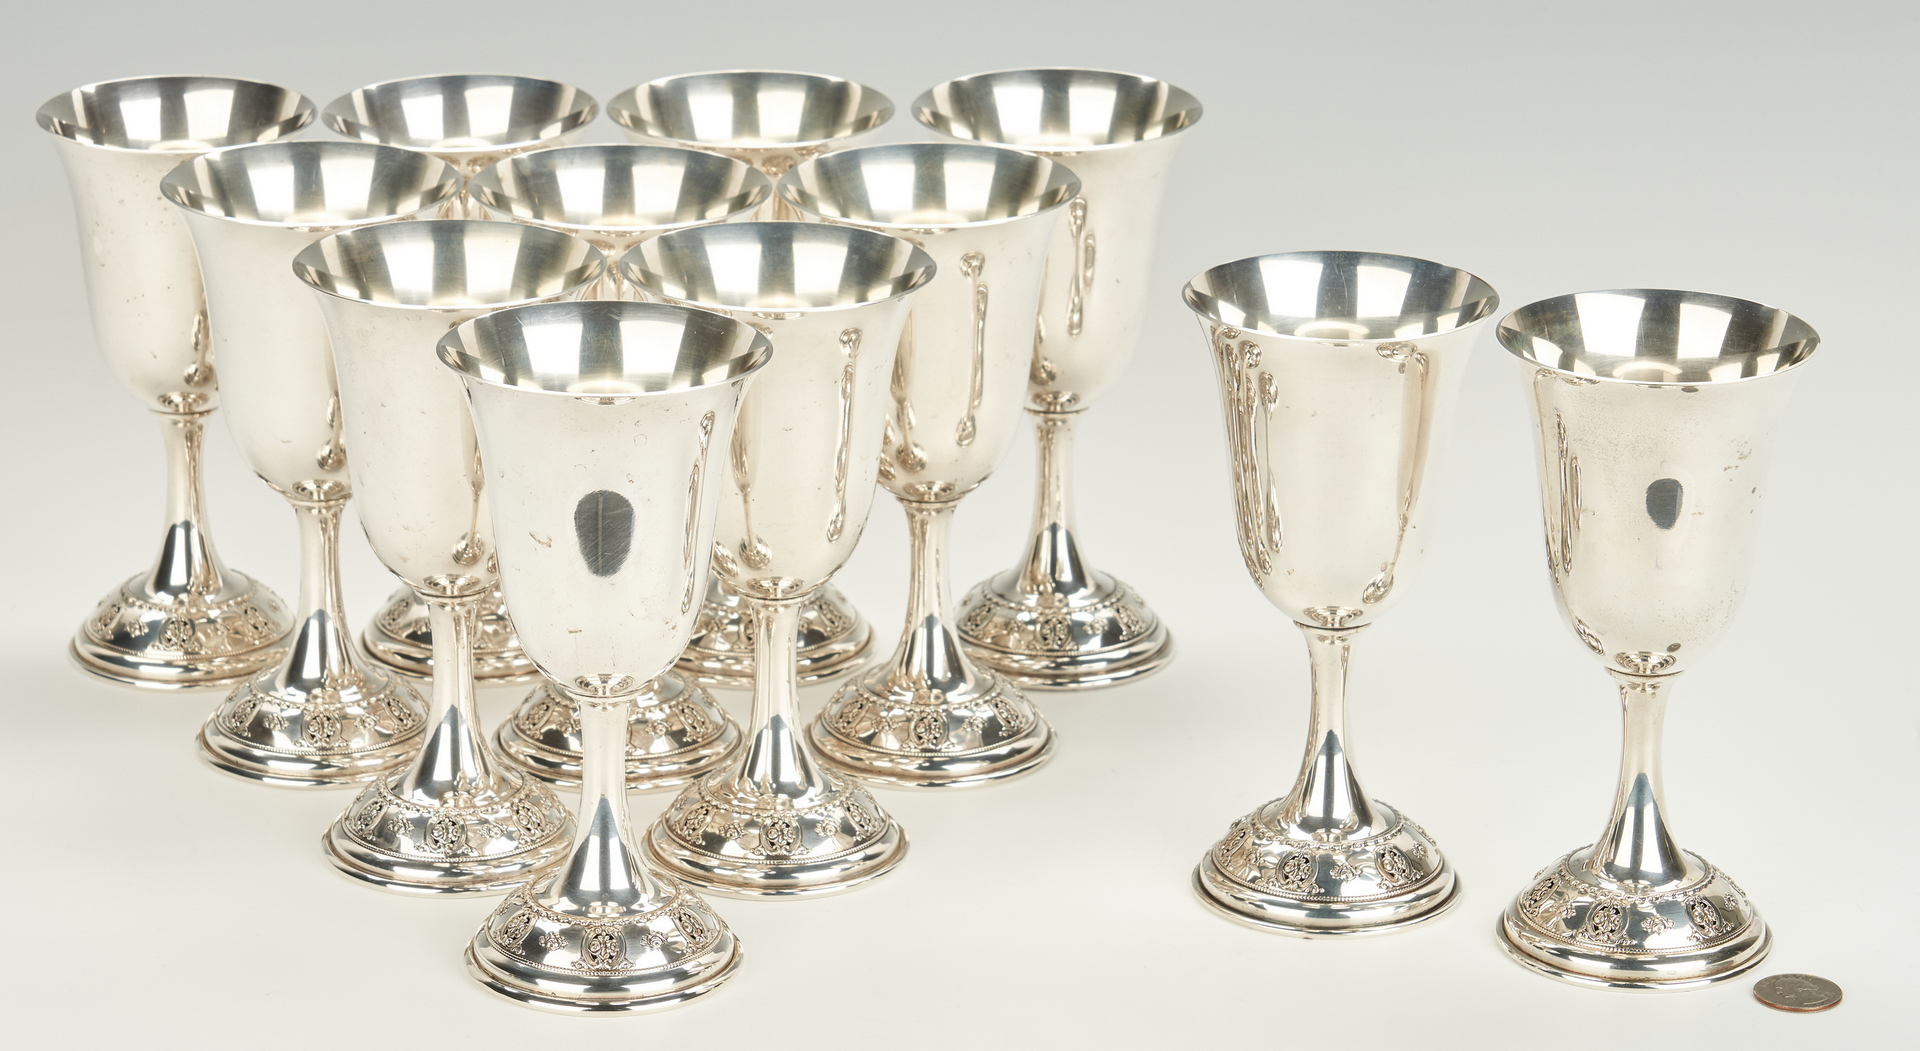 Lot 242: 12 Wallace Rose Point Sterling Silver Water Goblets